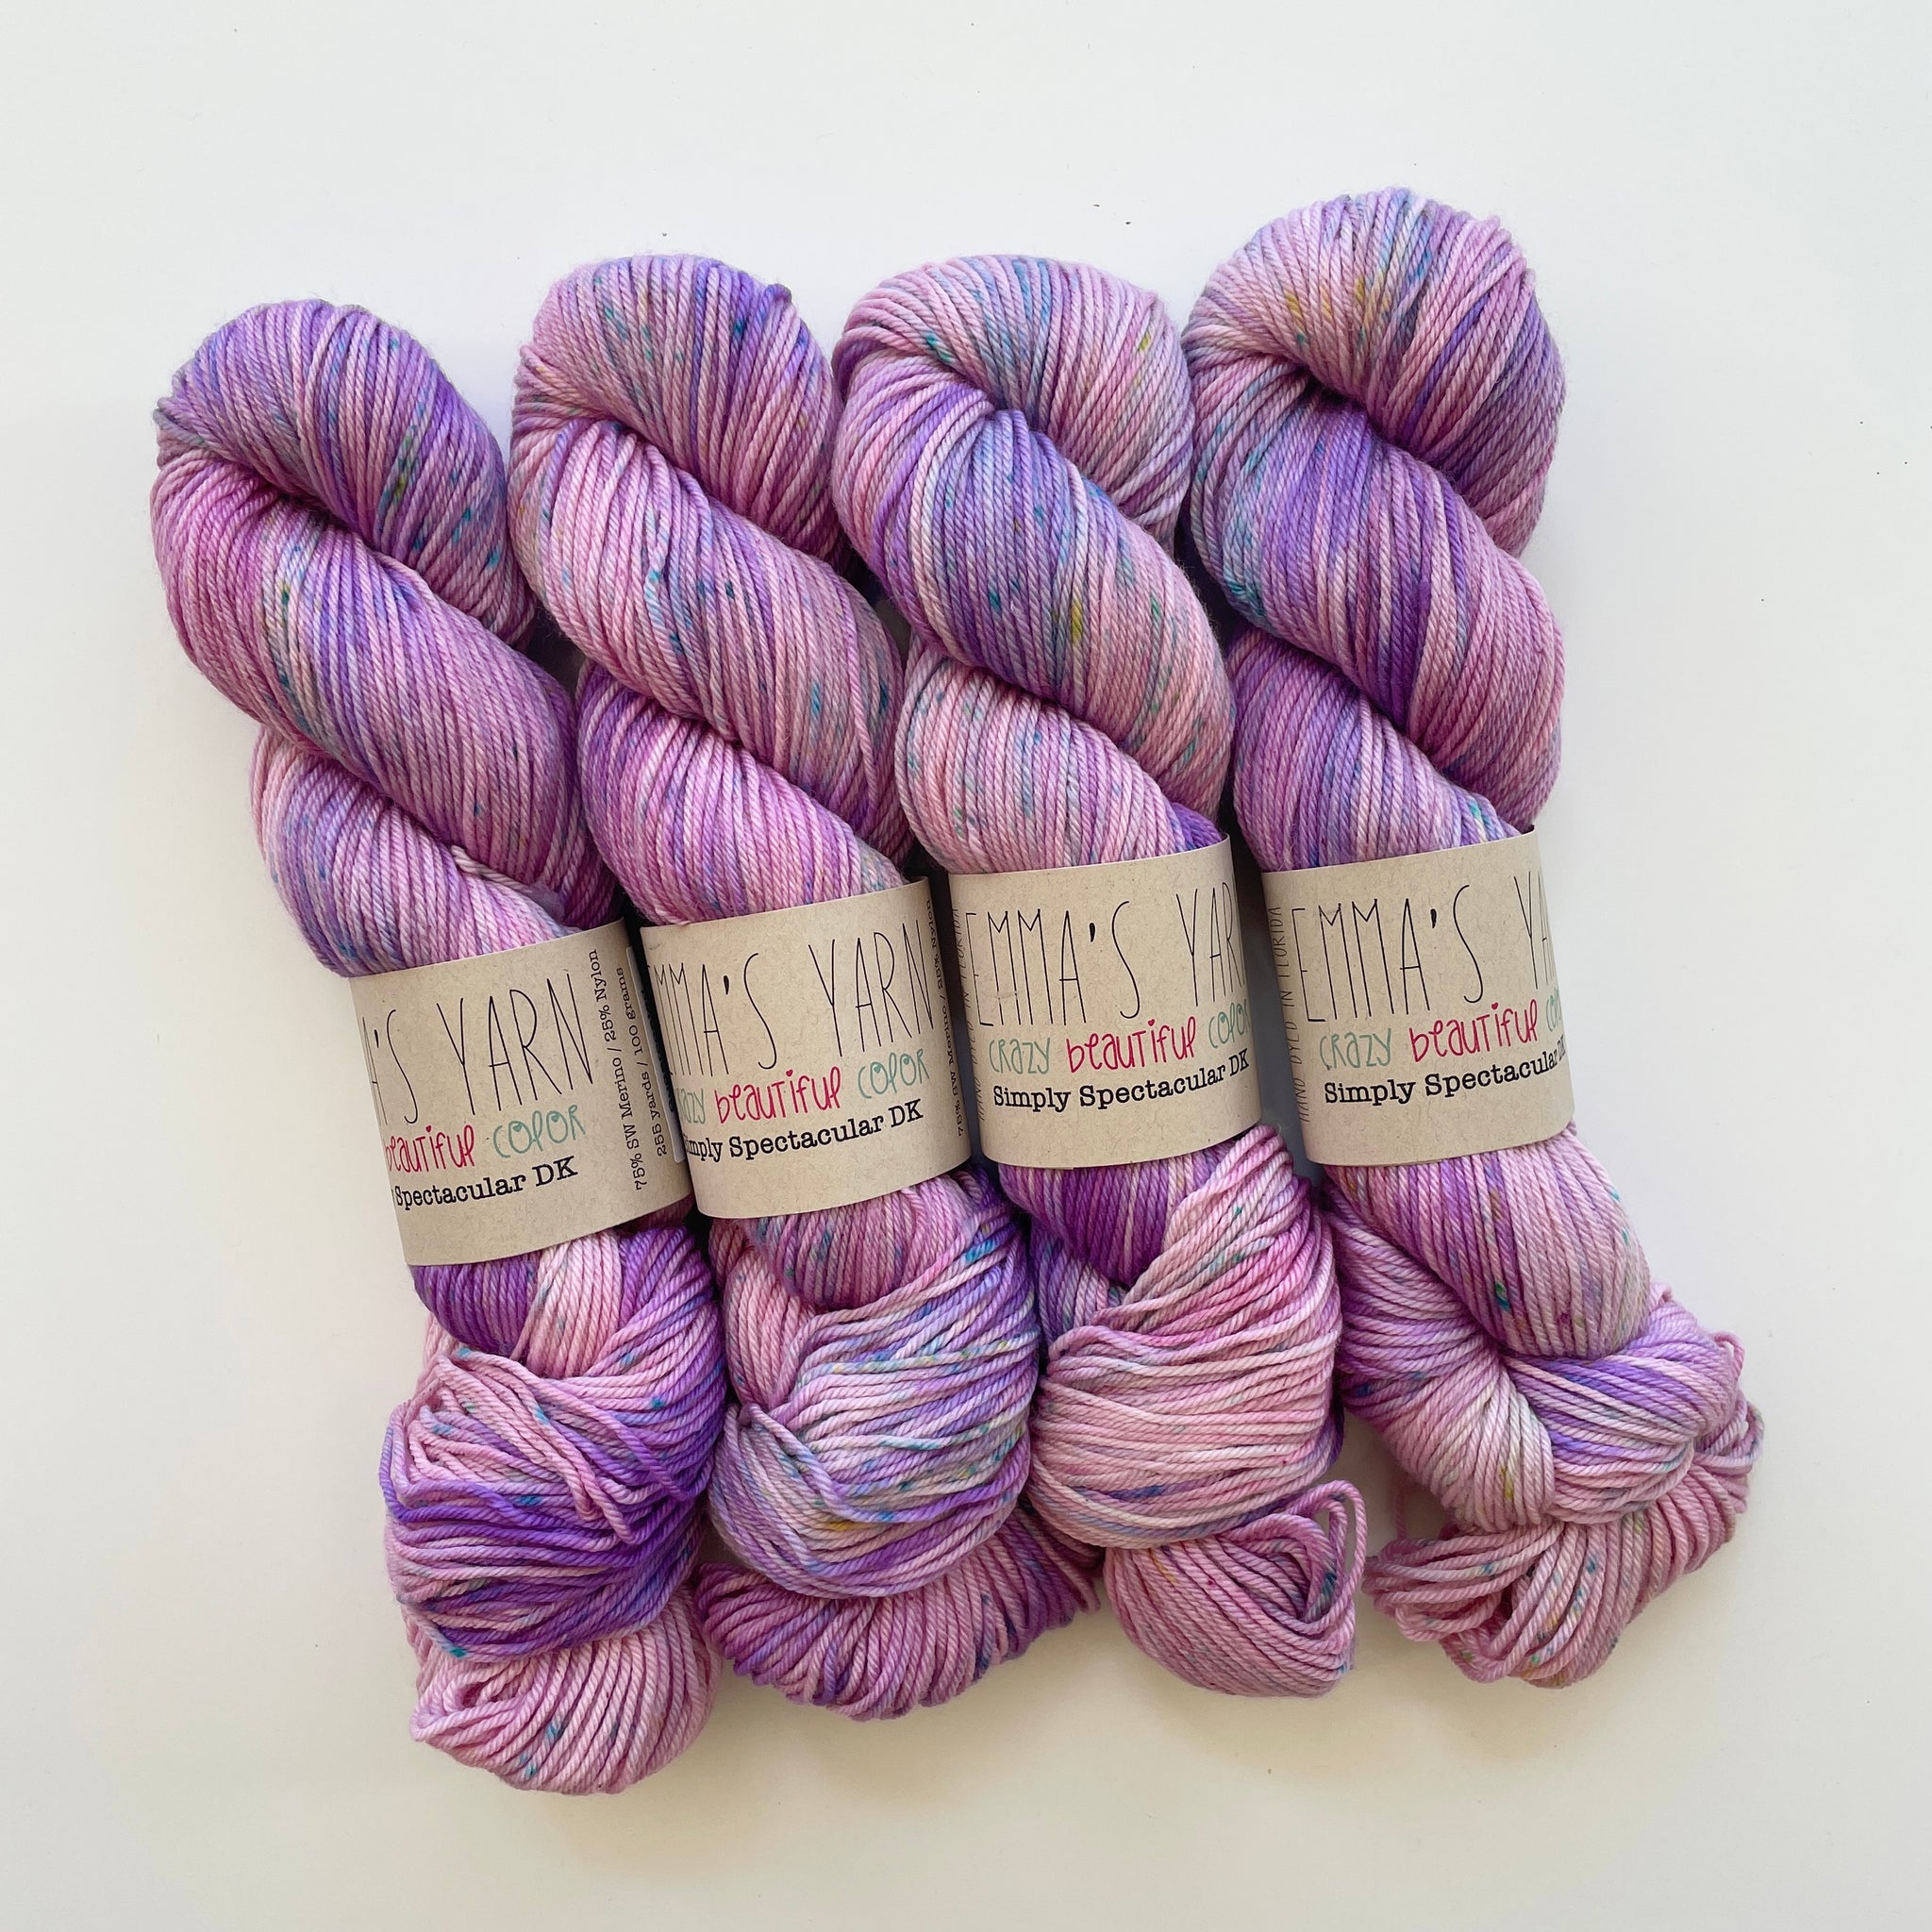 Sugarcoated - Simply Spectacular DK (6)